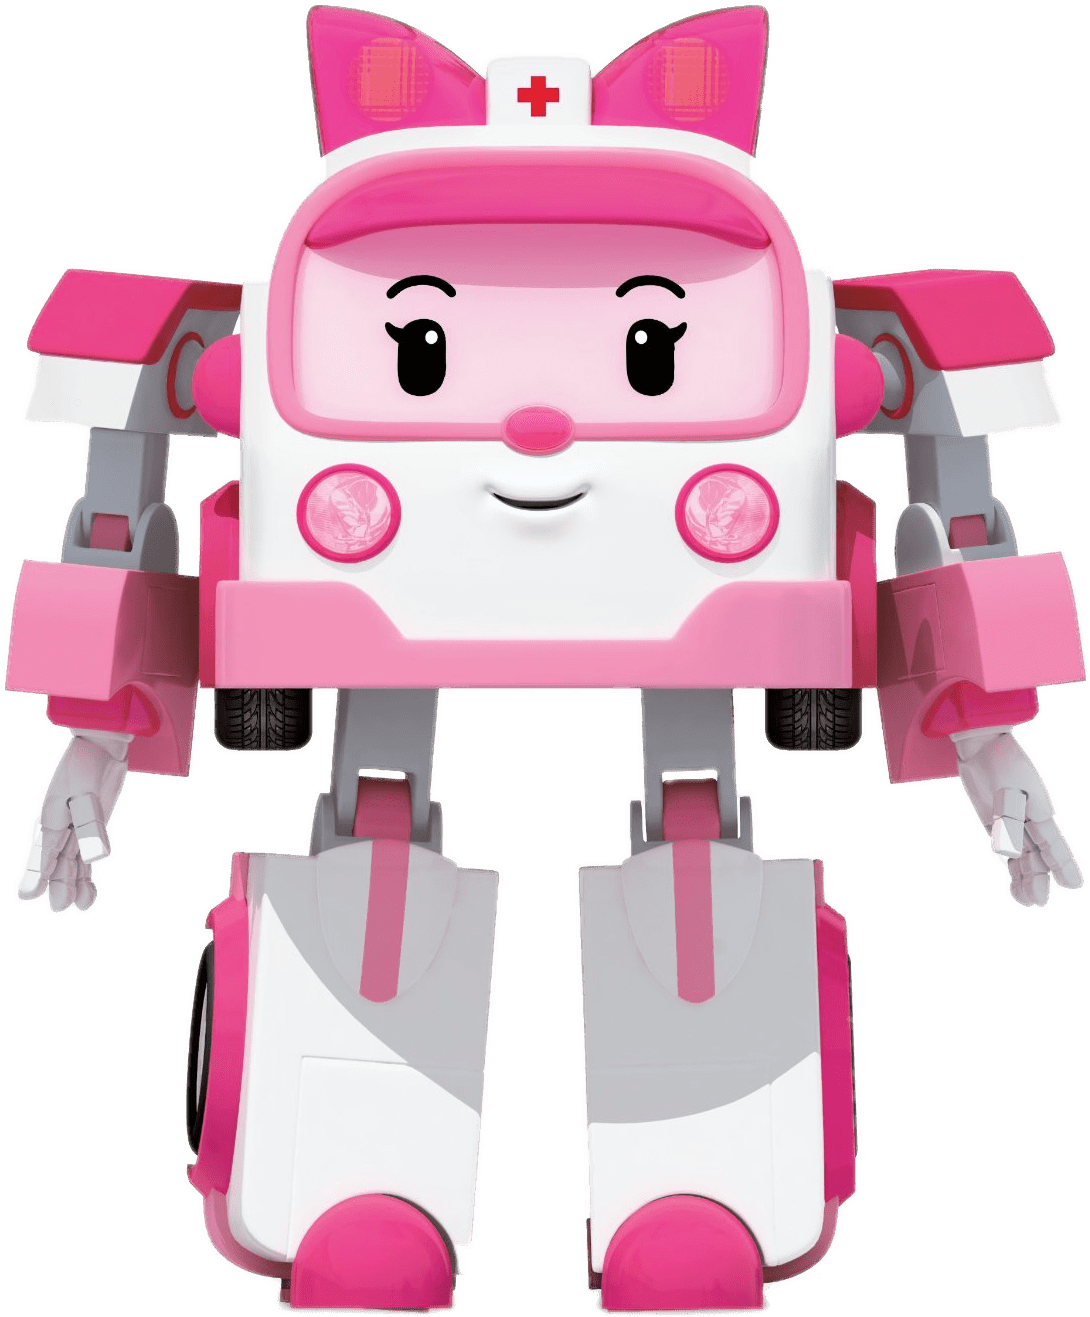 A Pink And White Robot